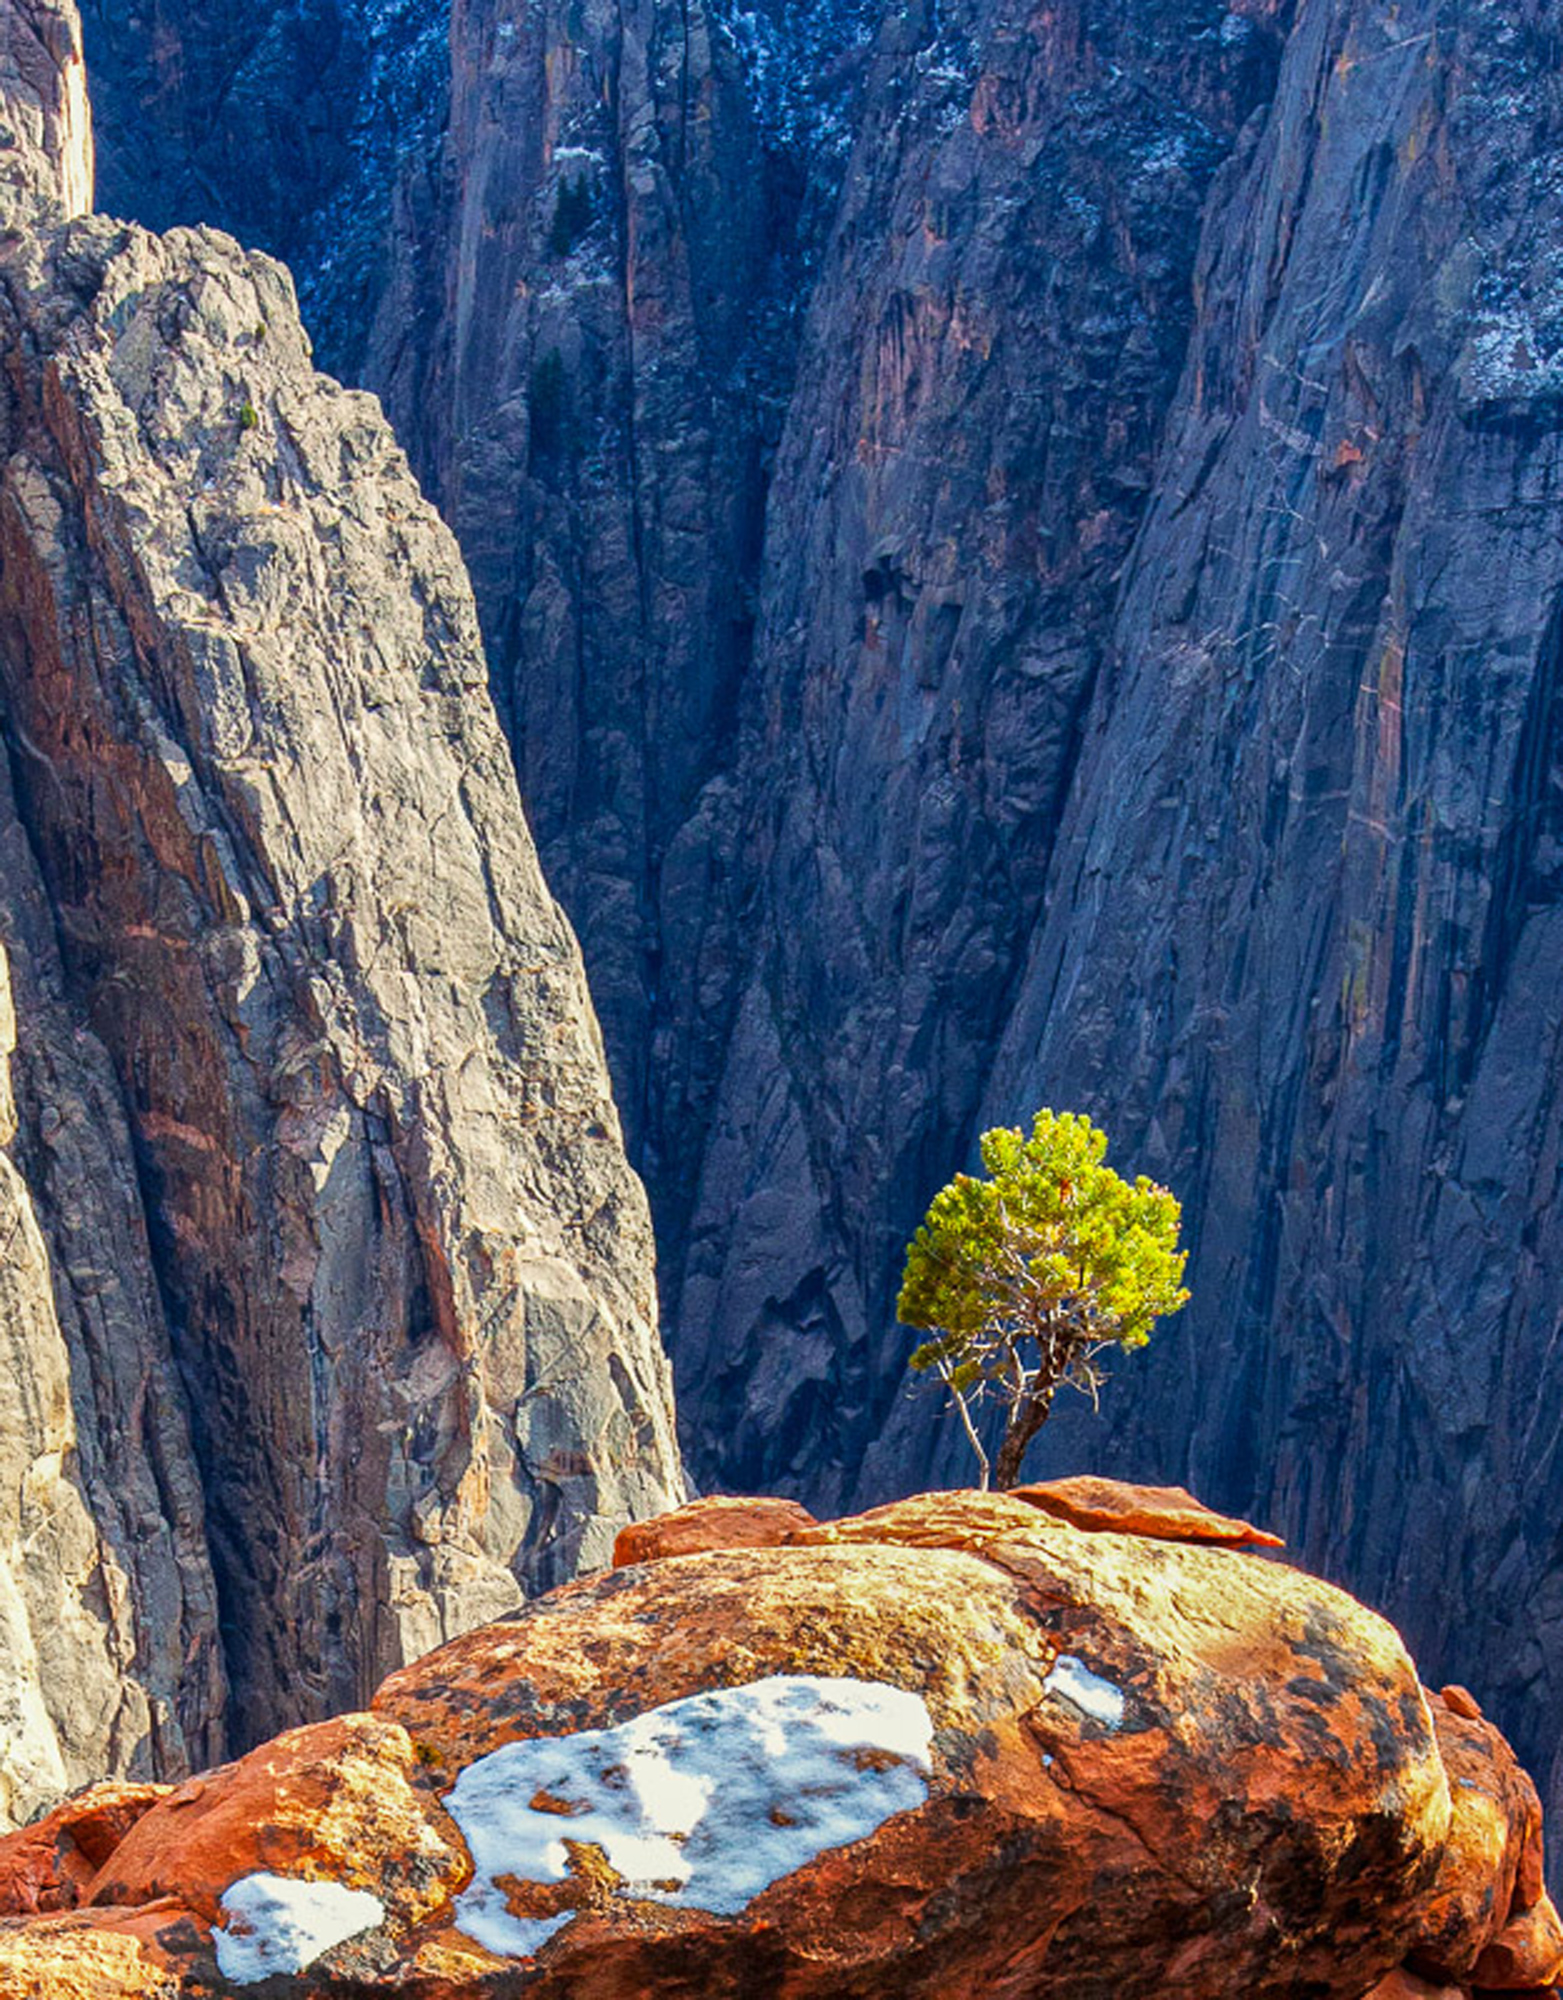 Black Canyon of the Gunnison #1